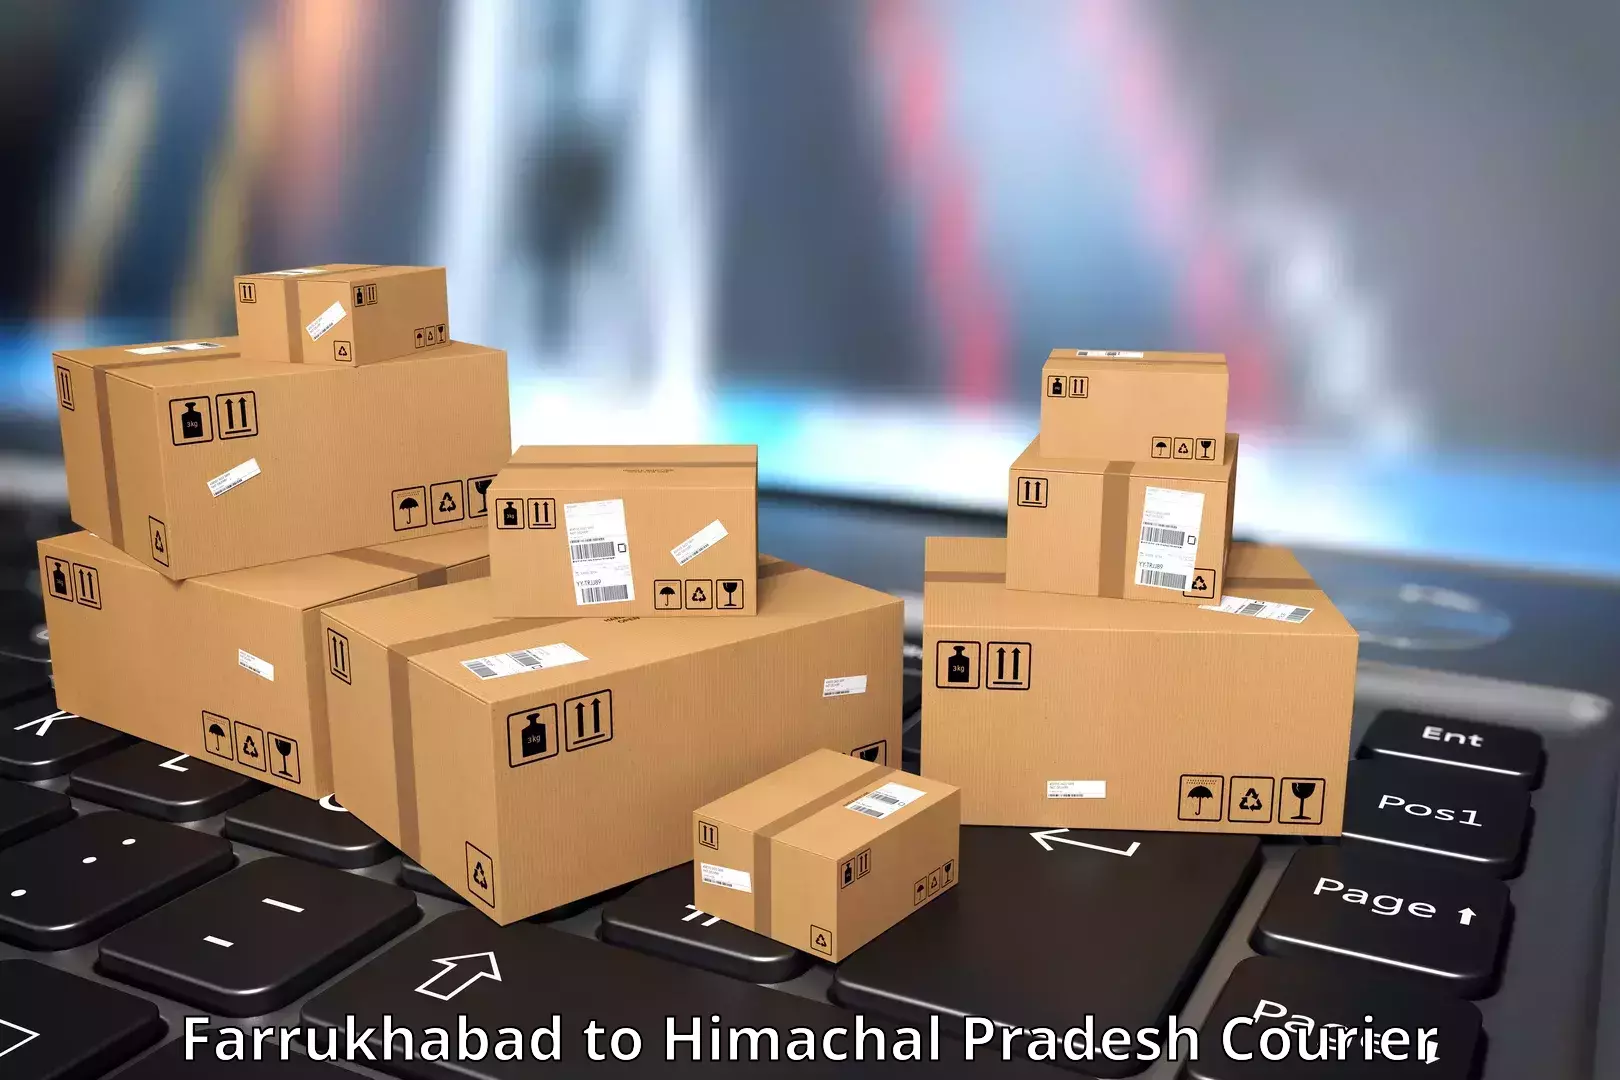 State-of-the-art courier technology Farrukhabad to Bilaspur Himachal Pradesh